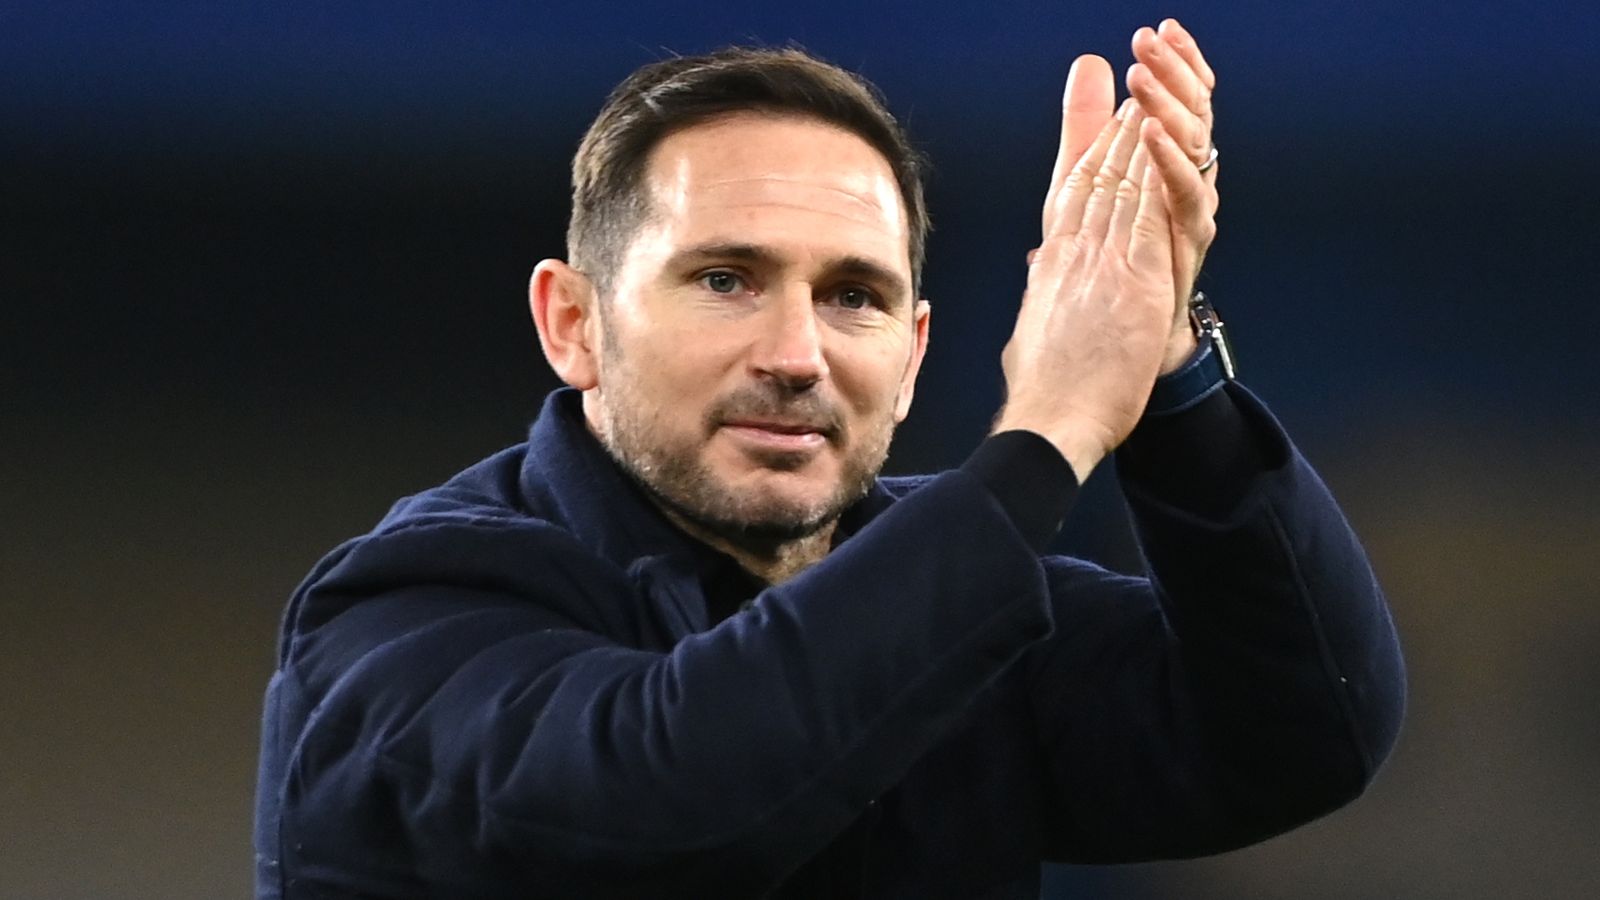 Frank Lampard expected to be interviewed for Everton job with Wayne Rooney also being discussed as a candidate